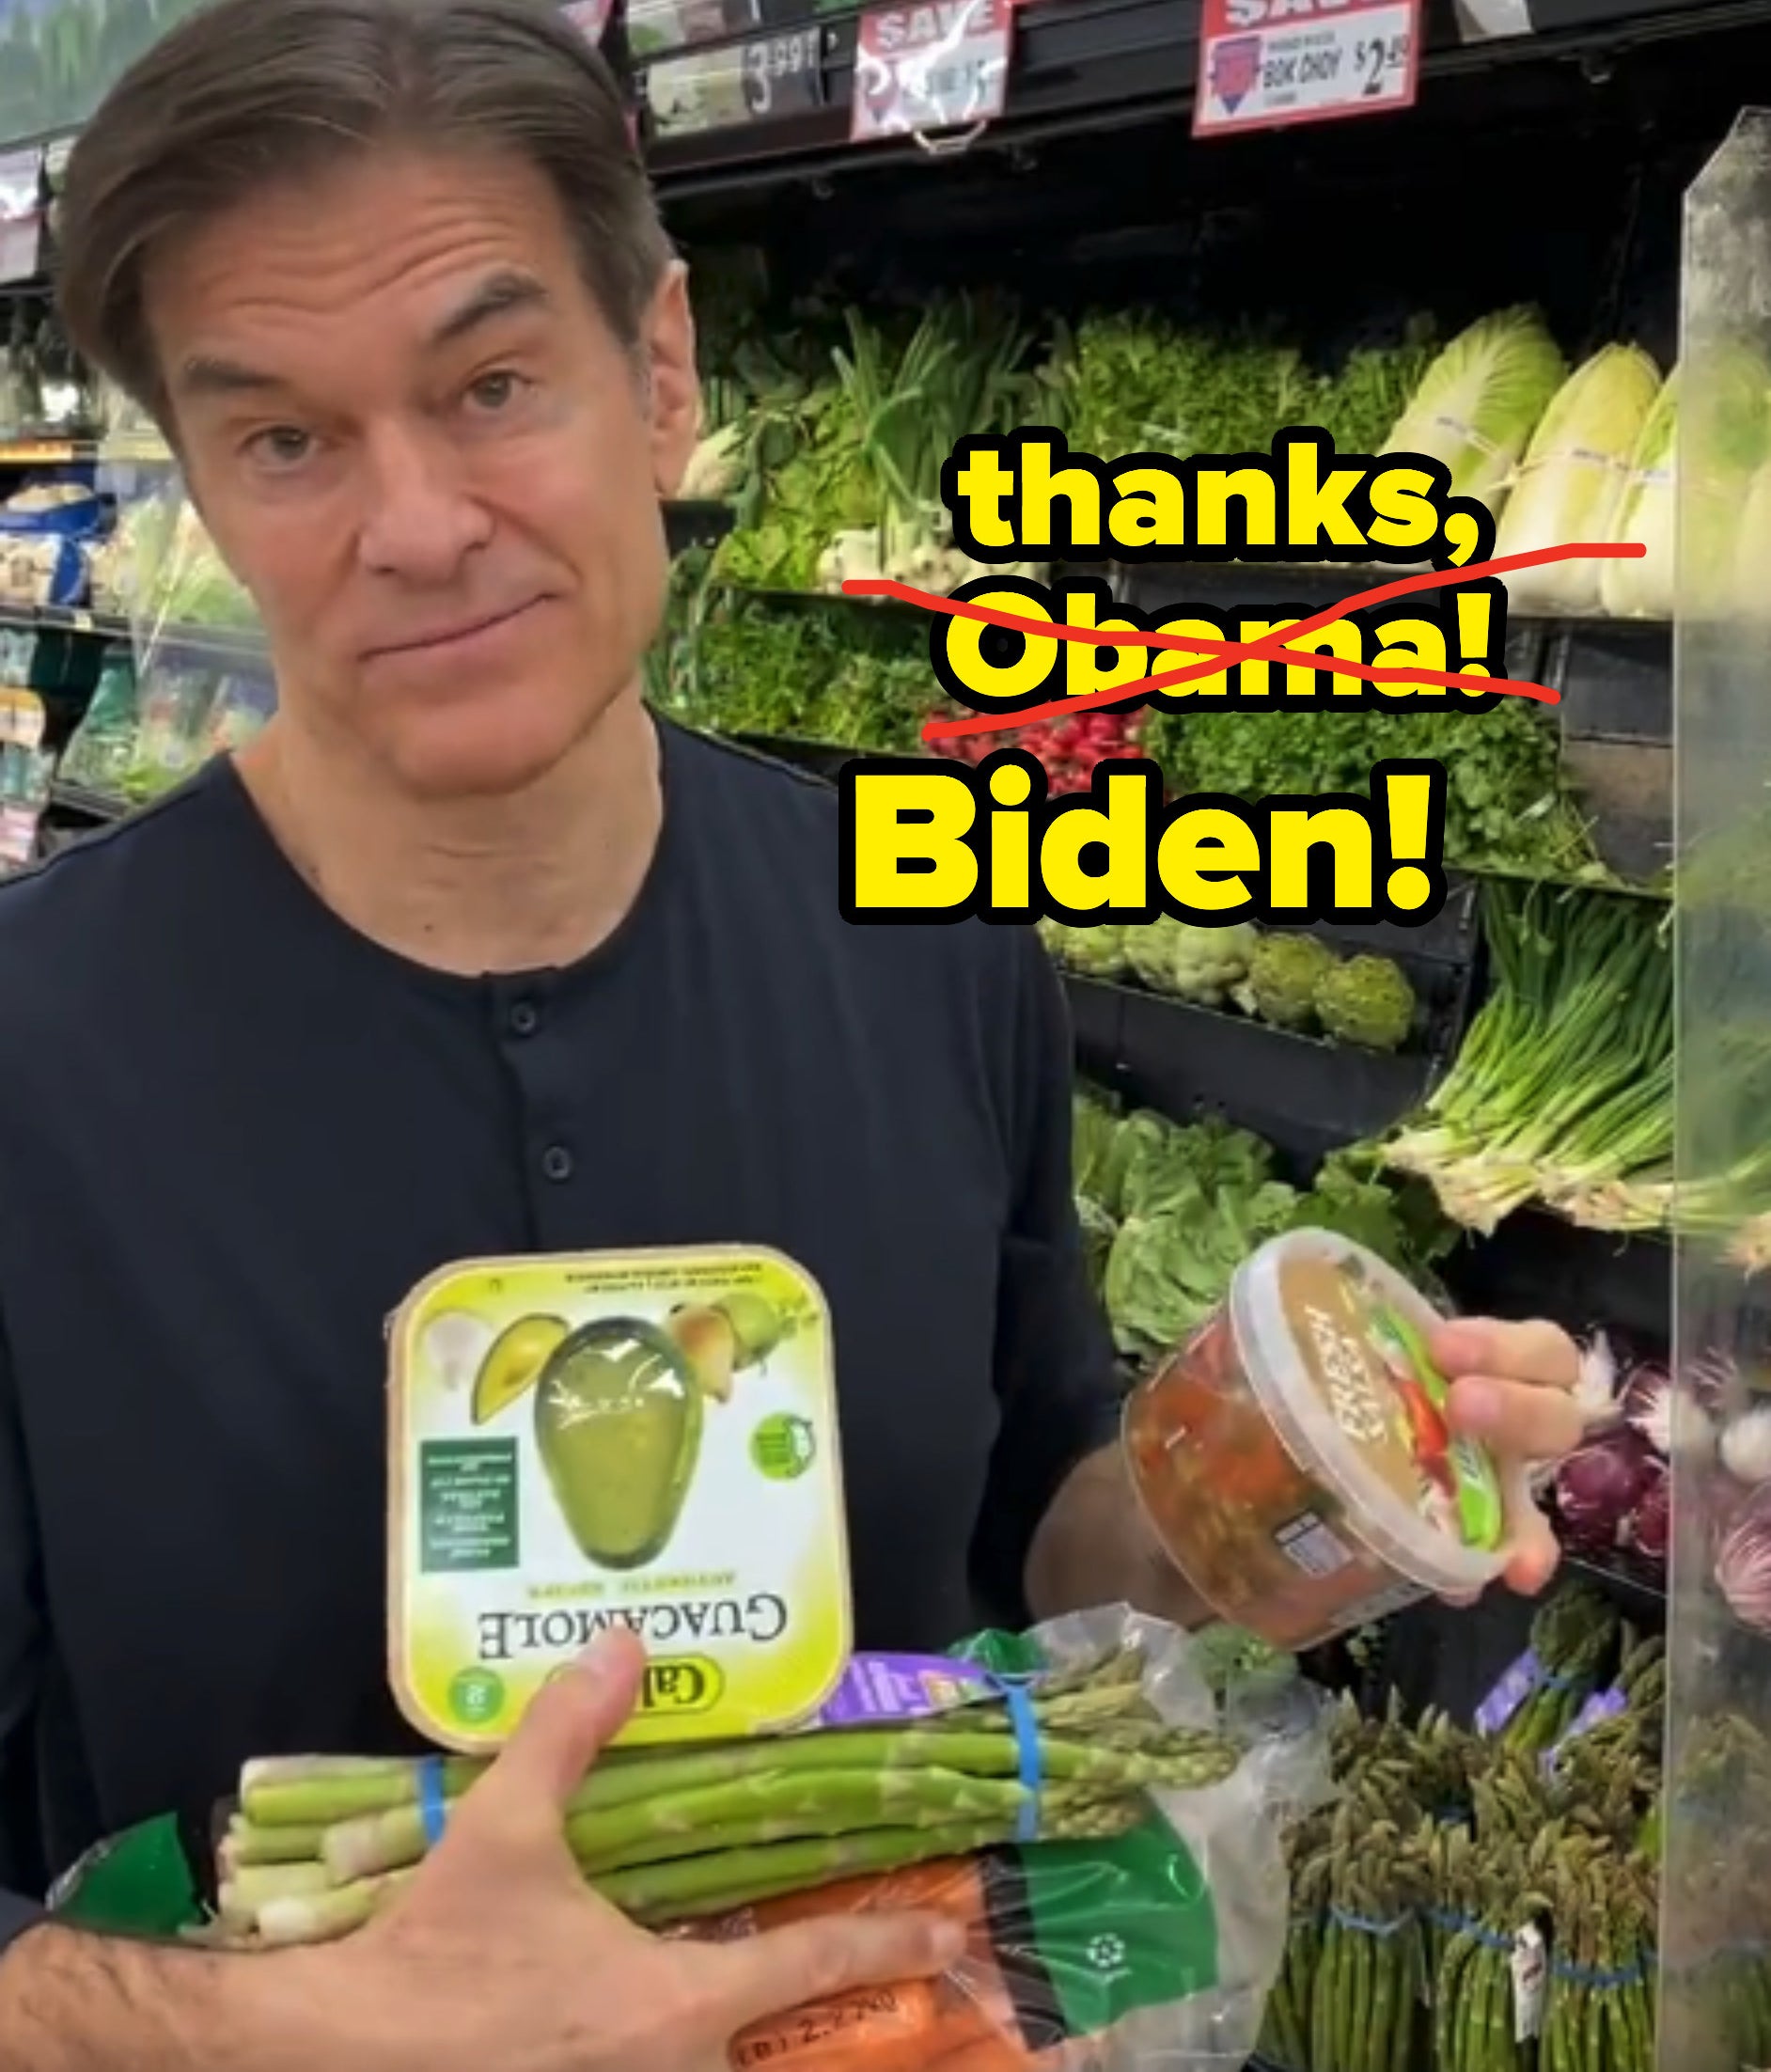 Oz looking at the camera disapprovingly with the words &quot;thanks, Biden&quot; and Obama&#x27;s name crossed out before Biden&#x27;s